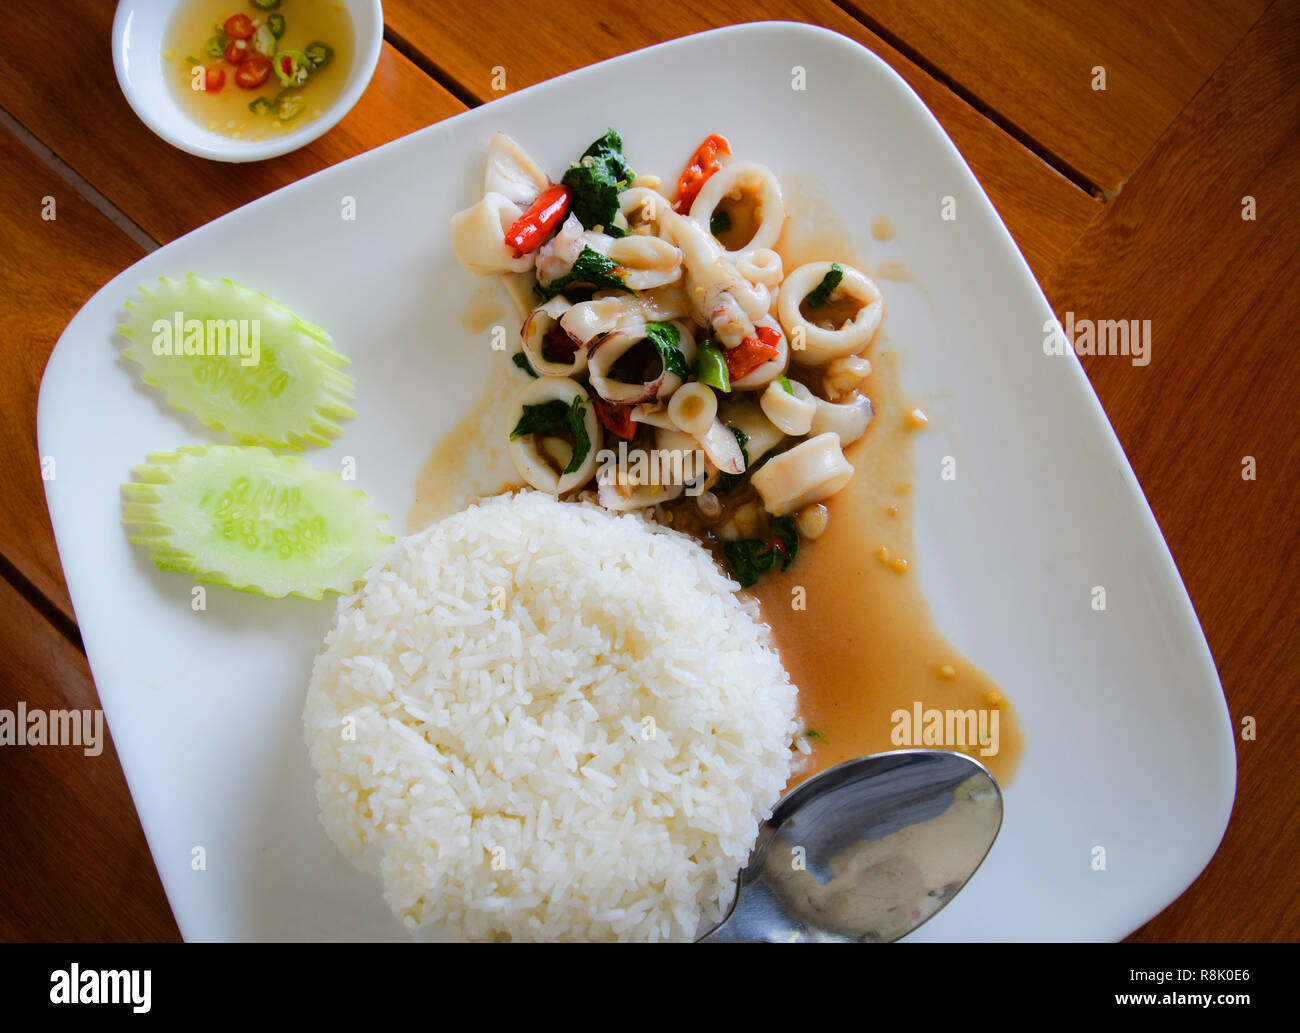 What is Oyster Sauce And Which is the Best One? - Hot Thai Kitchen